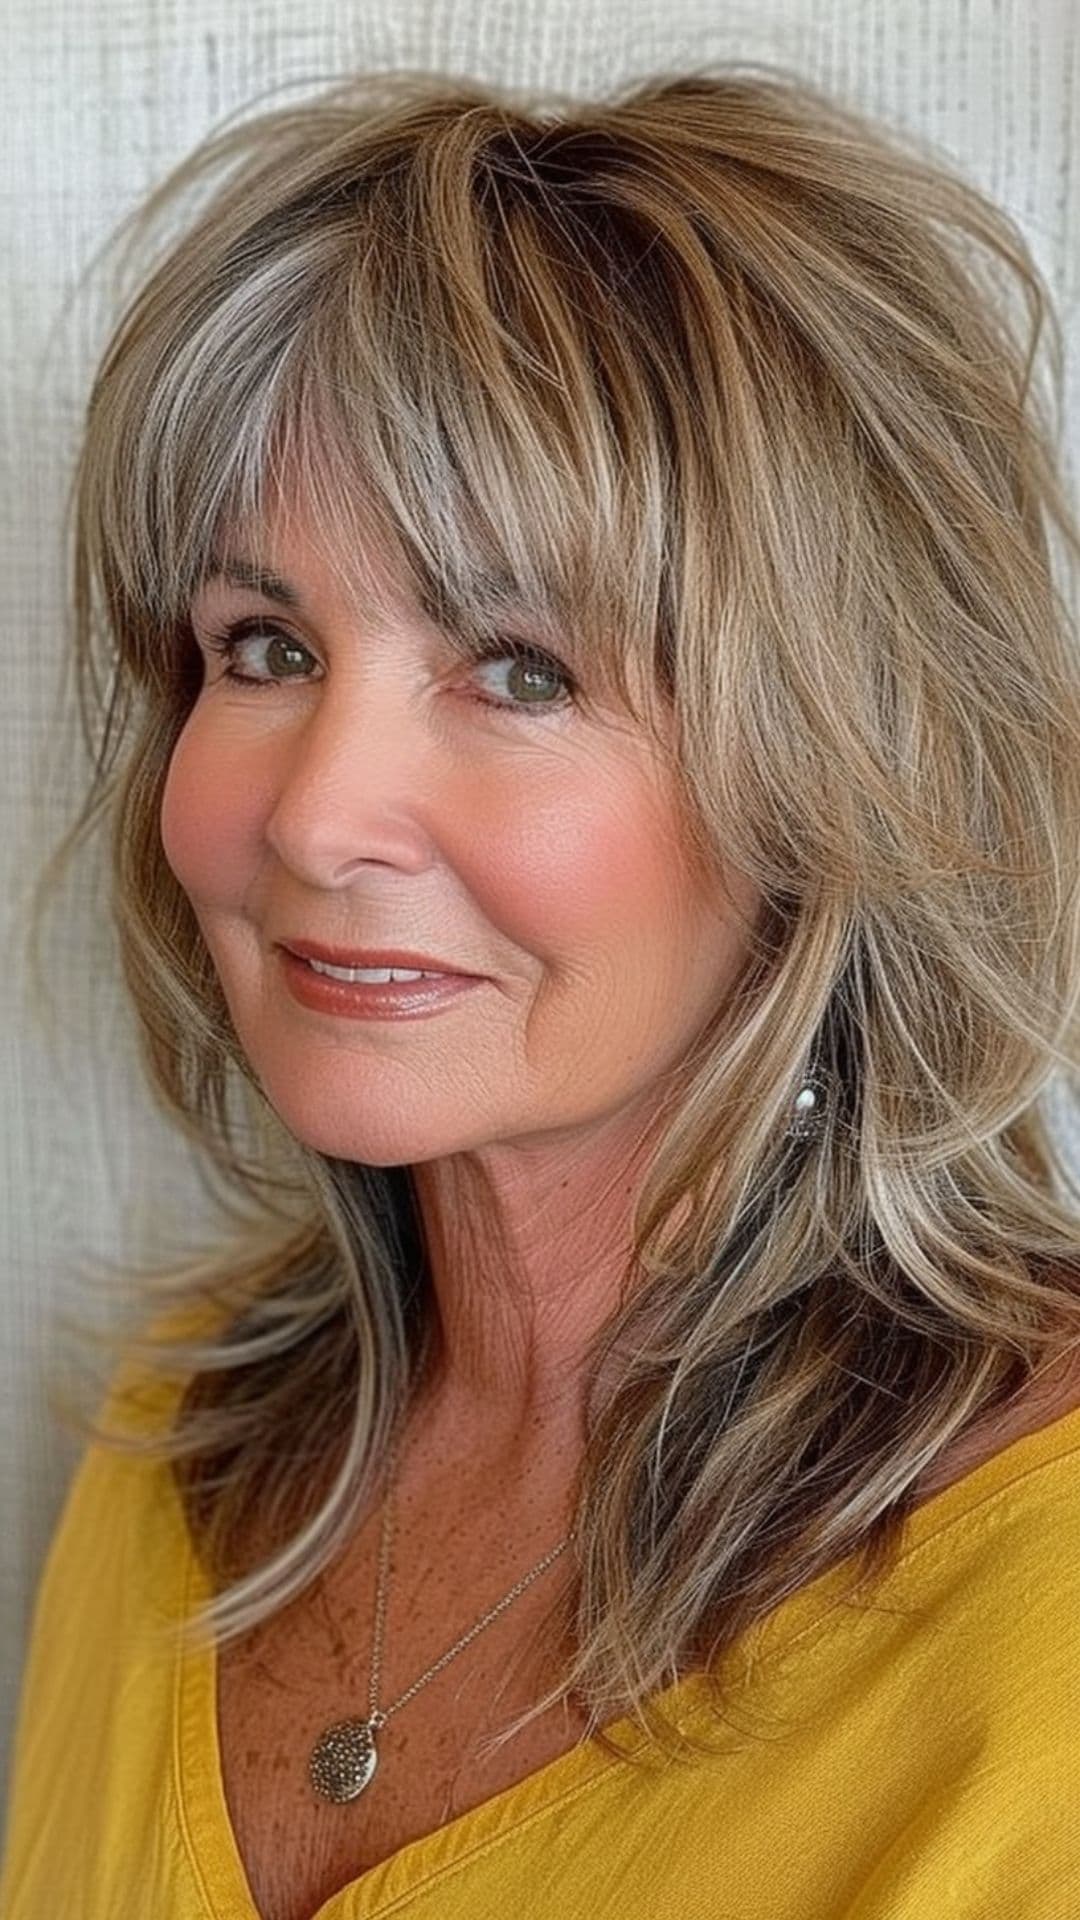 An older woman modelling choppy bangs with layered hairstyle.